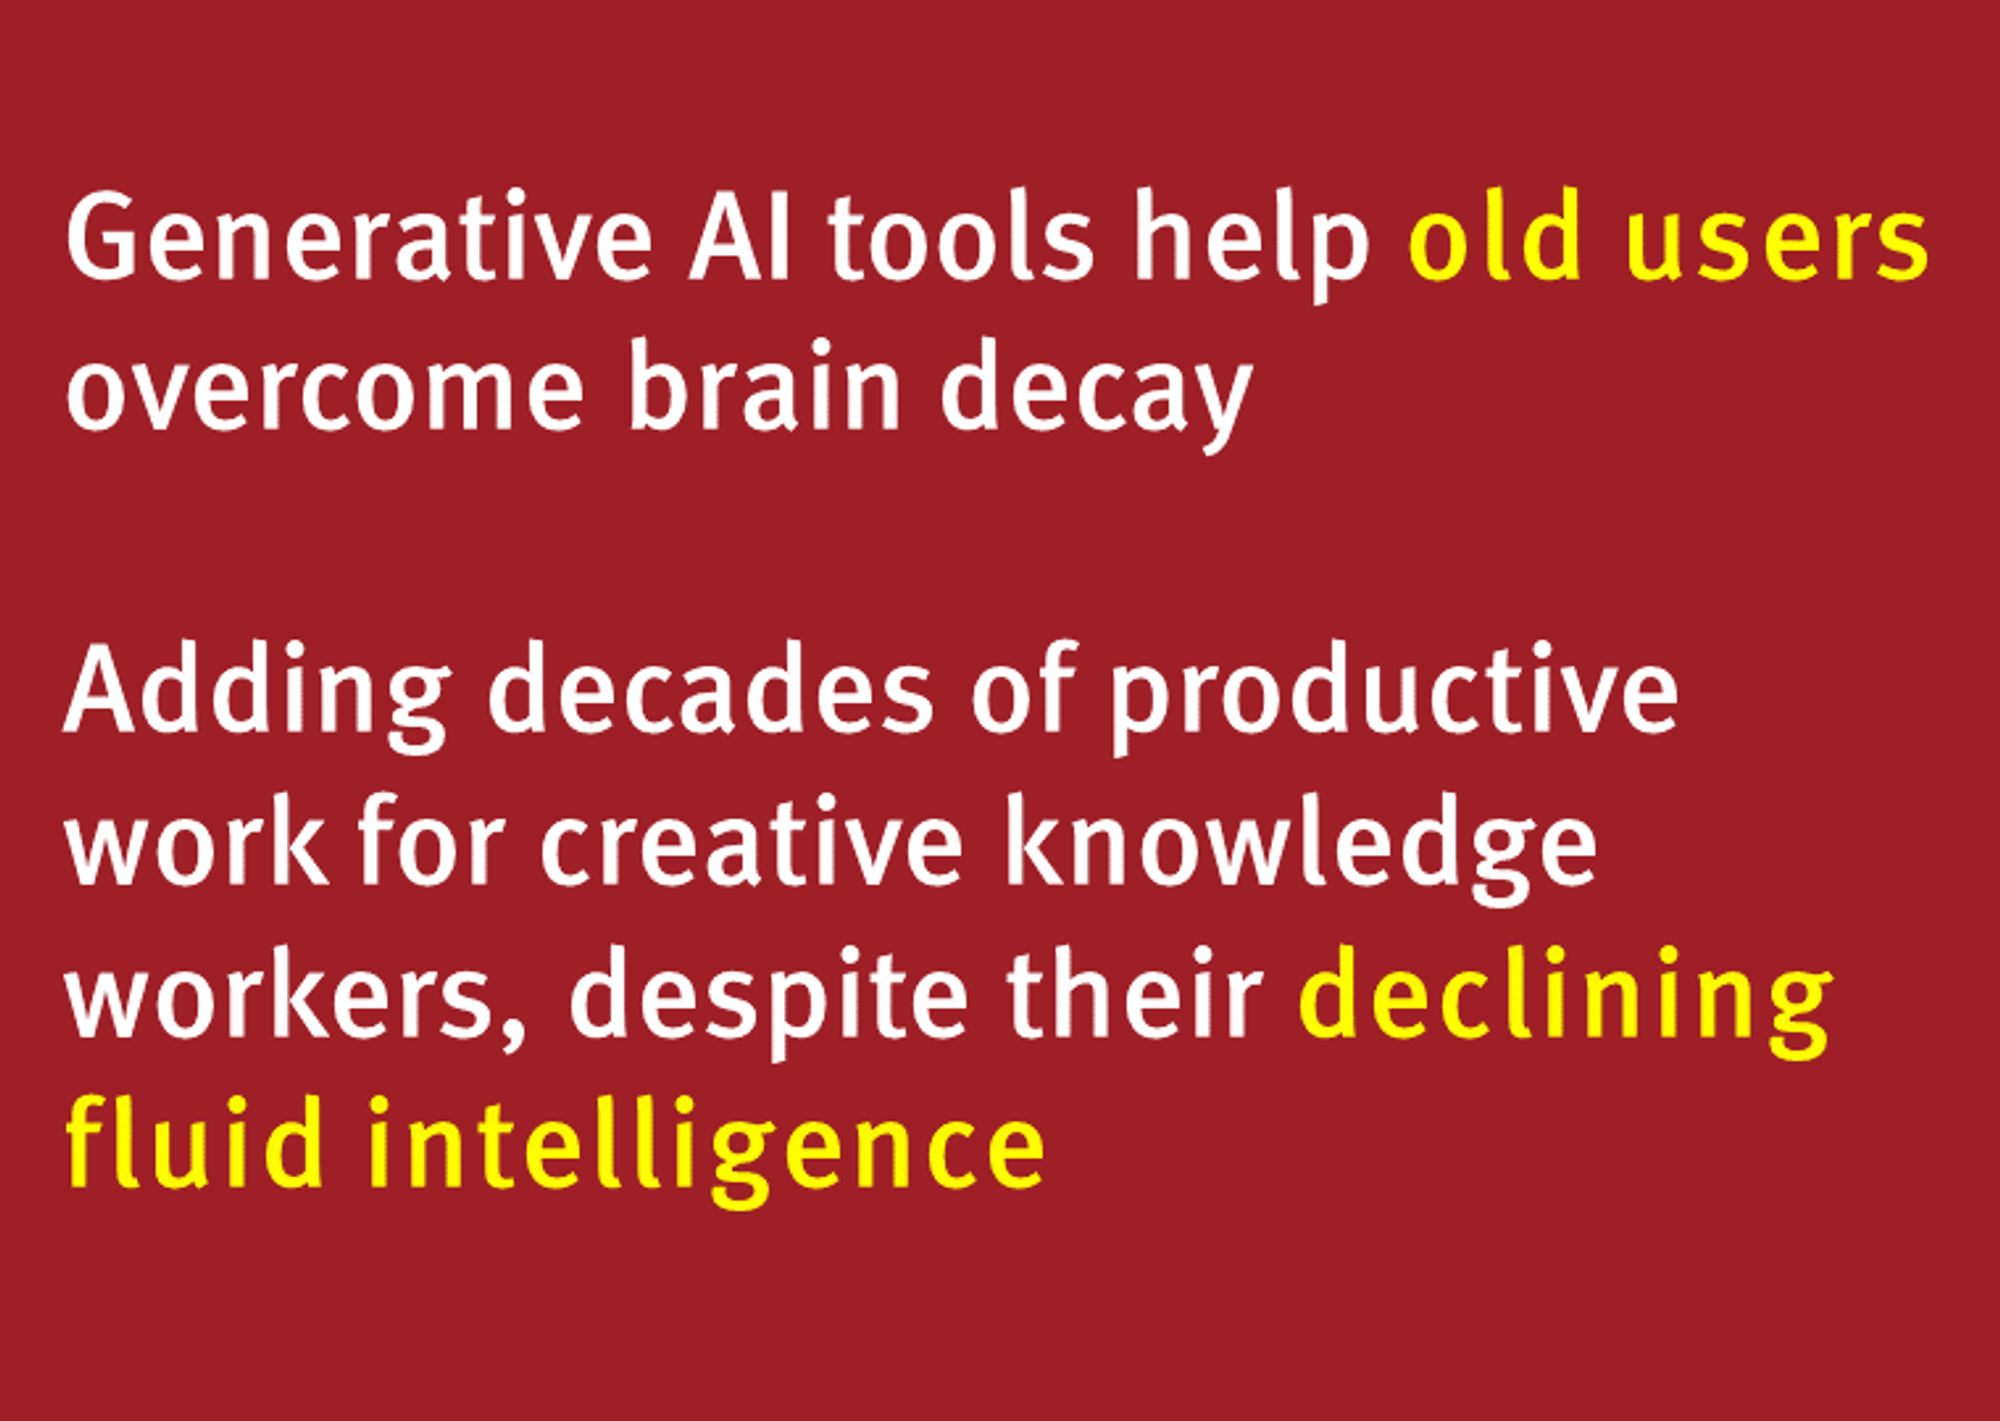 Generative AI Enhances Old Users’ Intellectual Performance